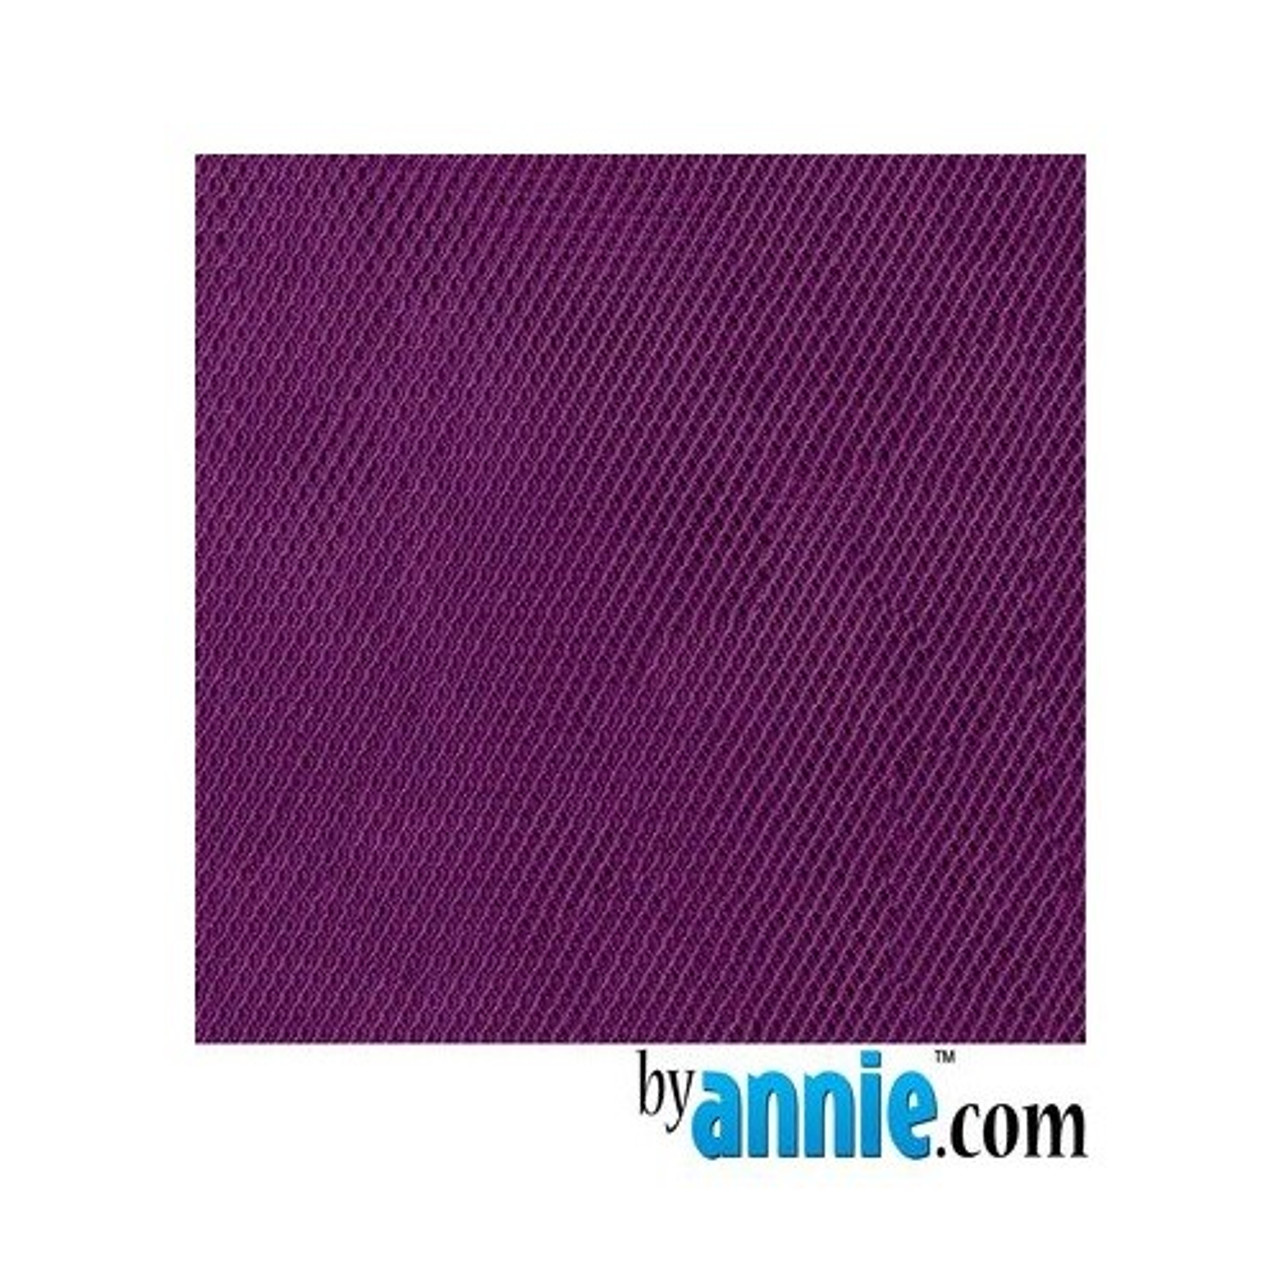 Tahiti - Lightweight Mesh Fabric - 18 inches x 54 inches - by Annie
Lightweight mesh fabric in various colors. Perfect for see-through pockets. Slightly stretchy for expandability. Soft yet sturdy. Add no bulk. Easy to sew.
Washer and dryer safe! 100% polyester.